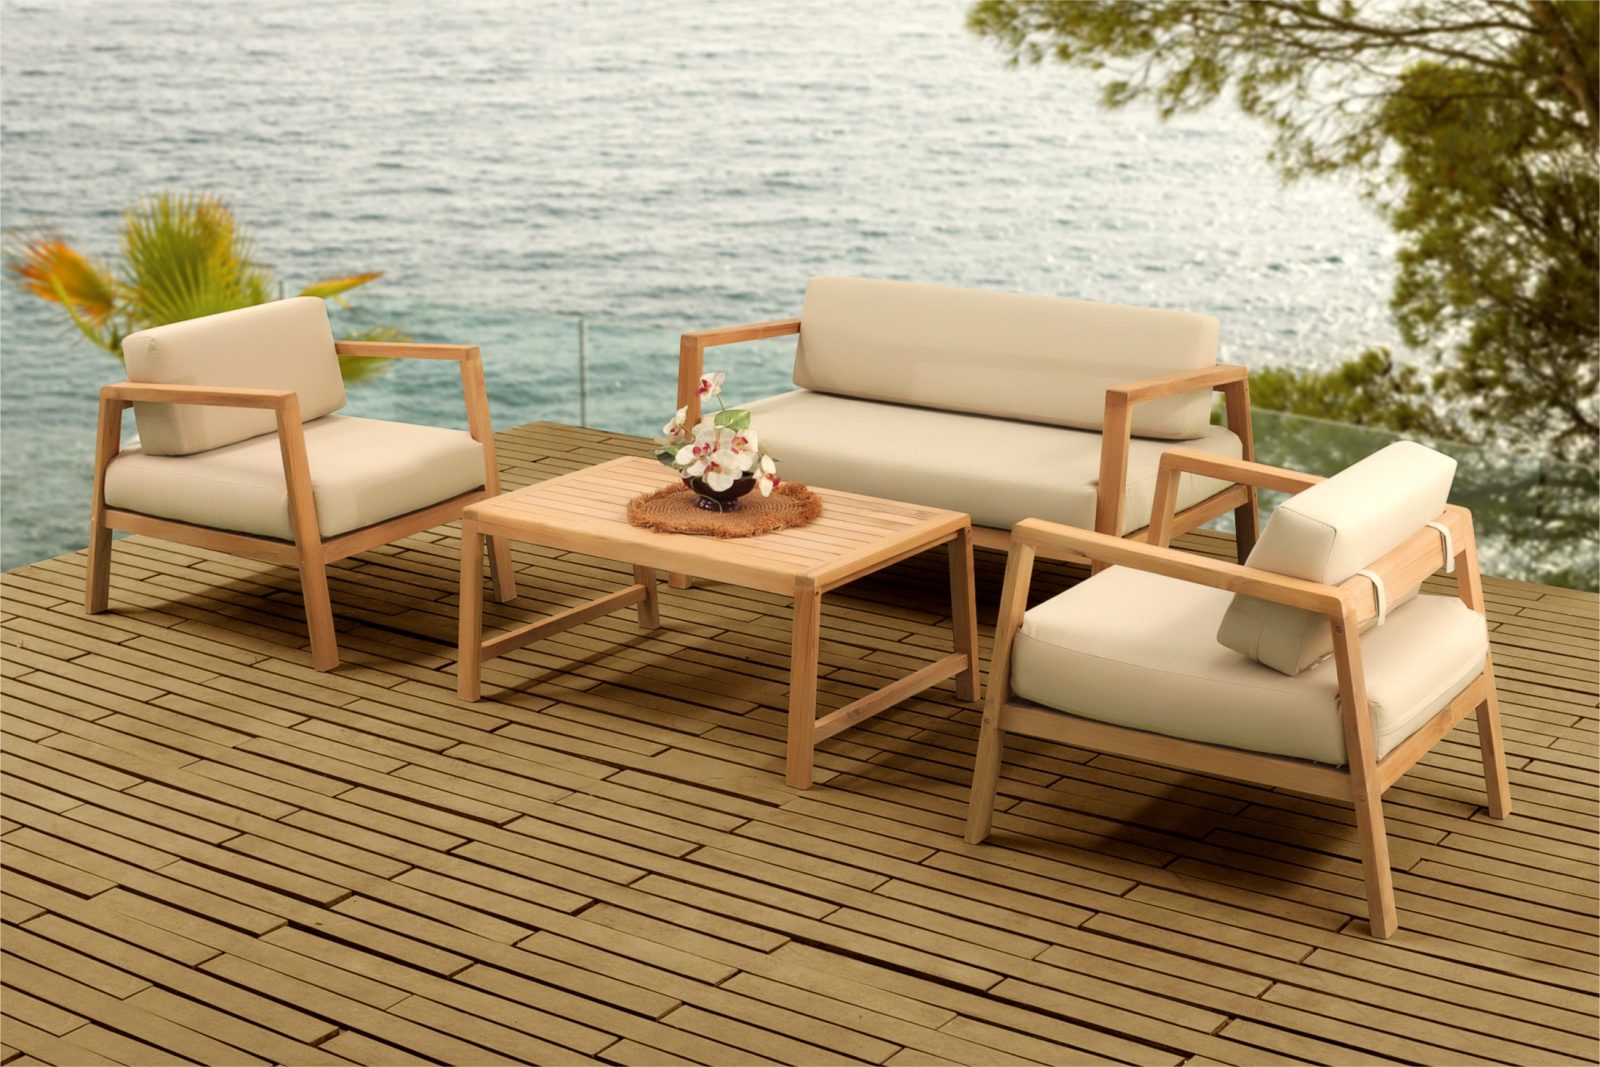 Essential Maintenance Tips For Your Indonesia Teak Furniture